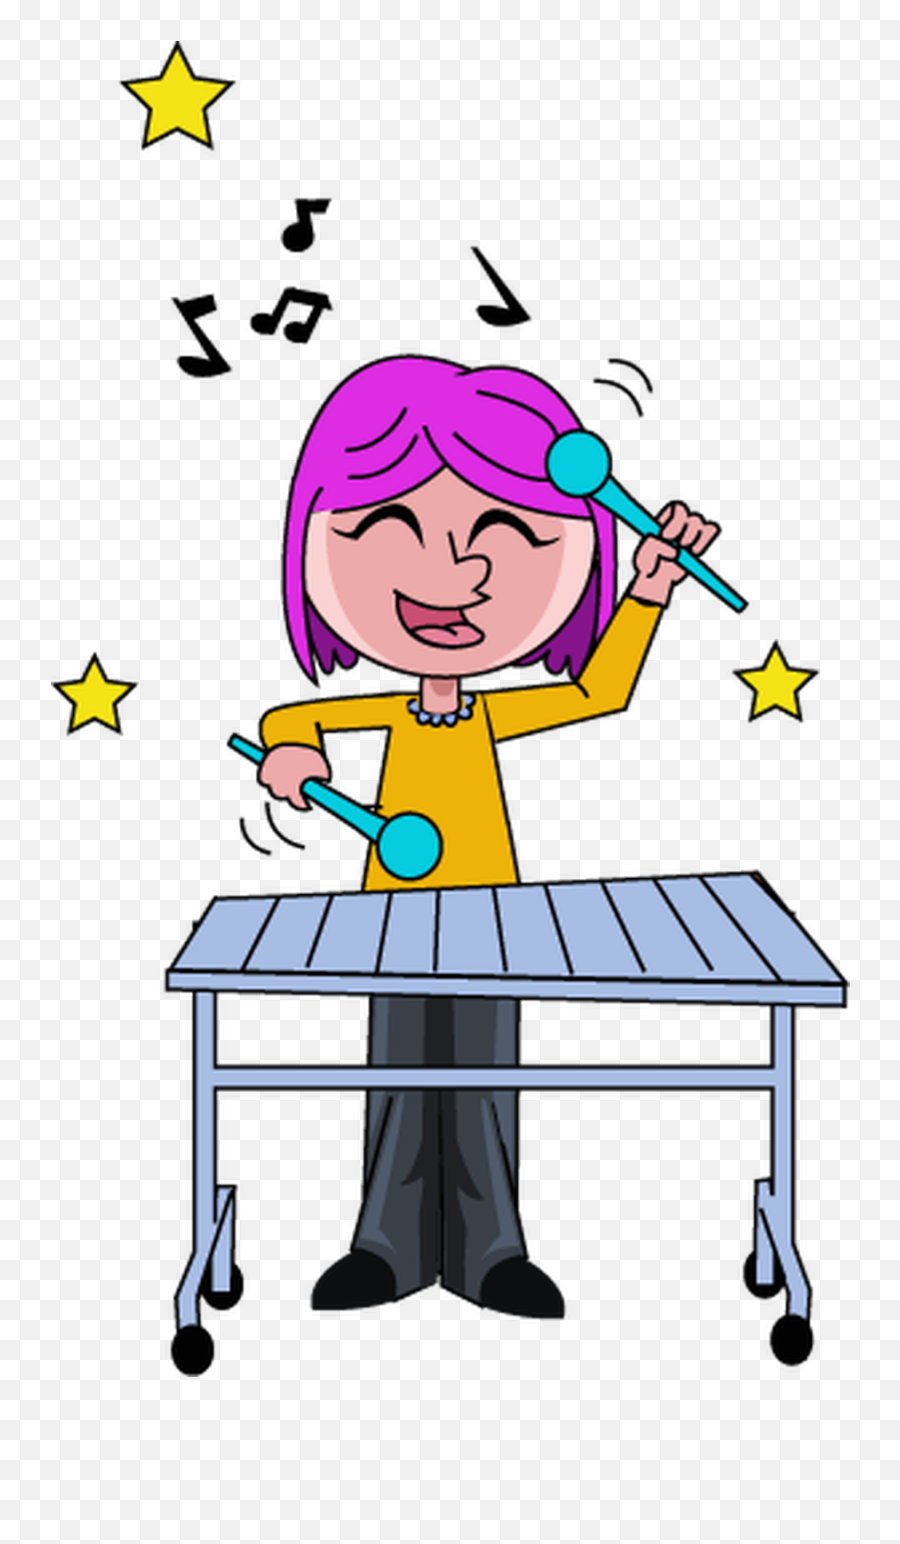 Xylophone Clipart Childs Xylophone - Child Playing Xylophone Clipart Emoji,Xylophone Clipart